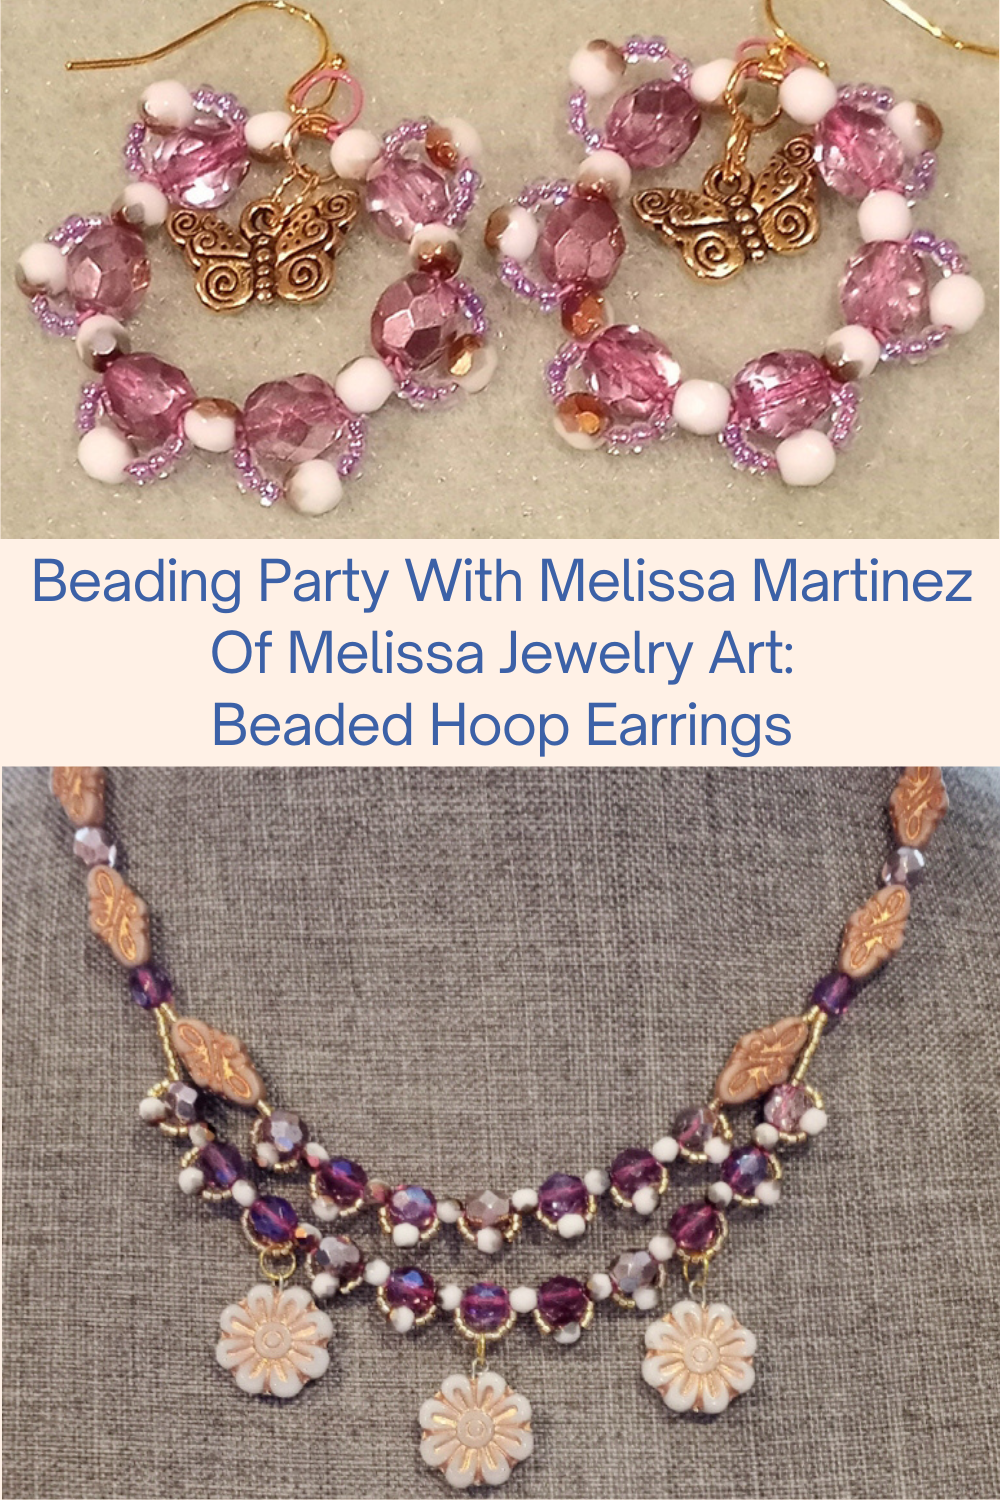 Beading Party With Melissa Martinez Of Melissa Jewelry Art Beaded Hoop Earrings Collage